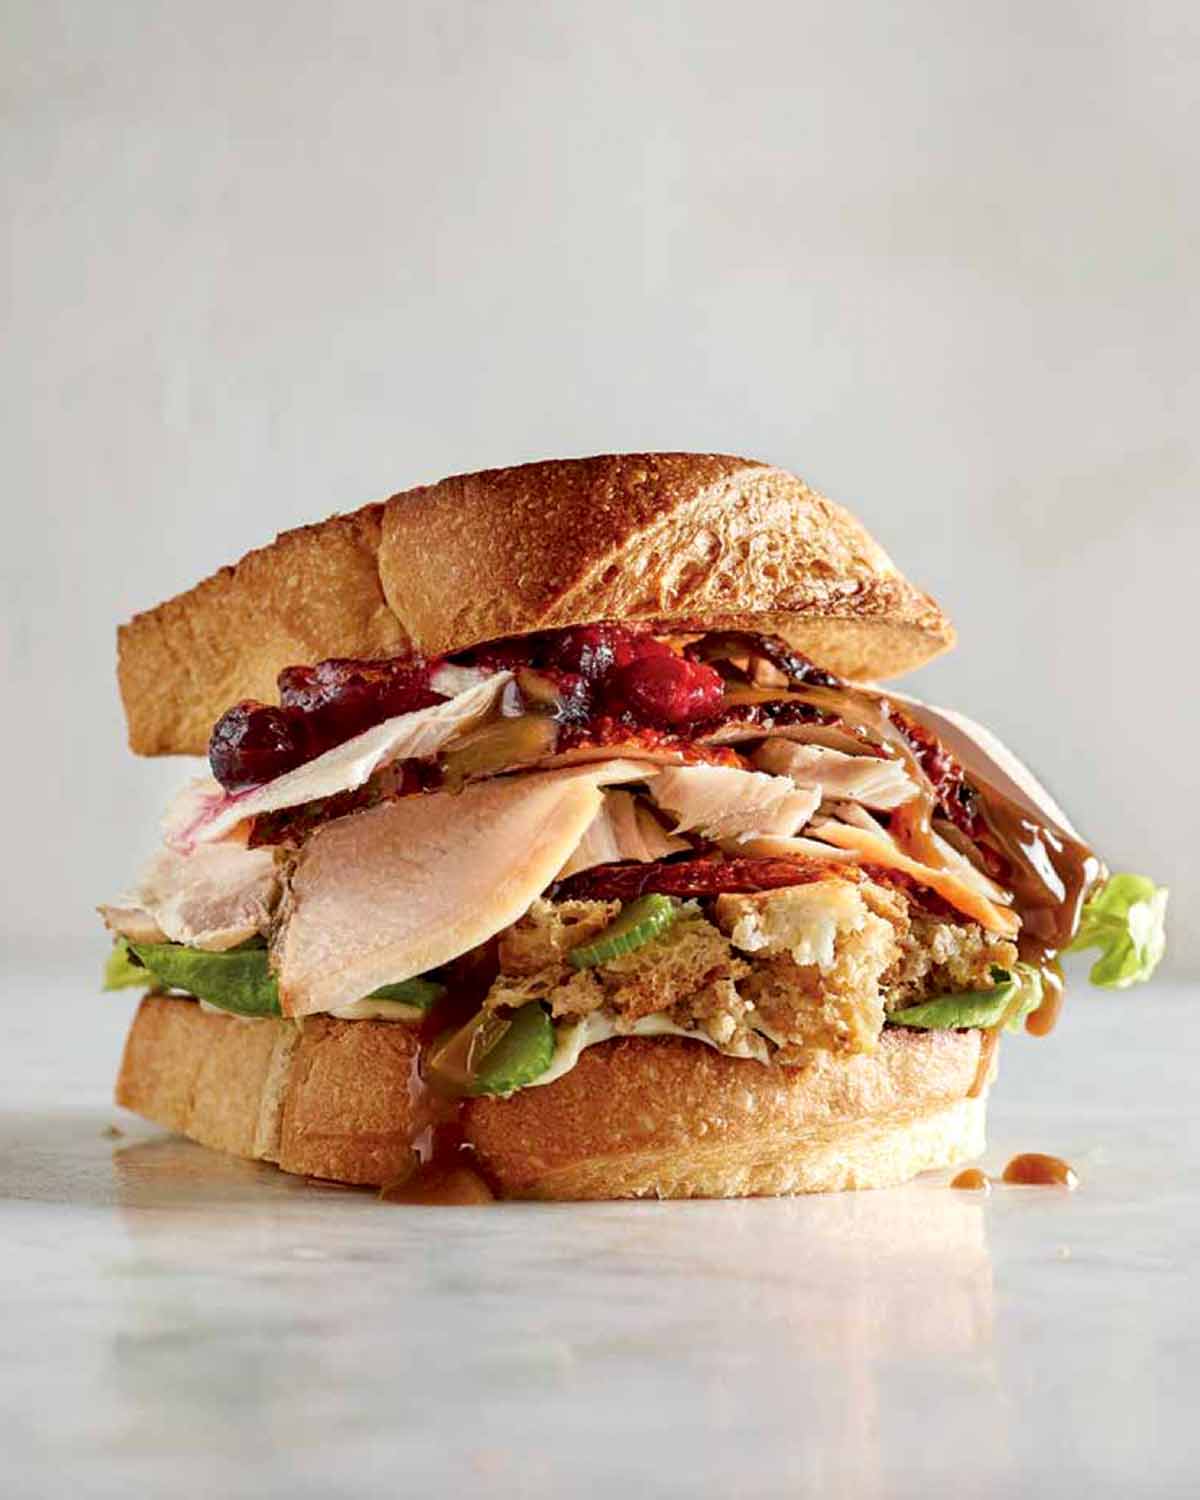 A turkey cranberry sandwich with stuffing on toasted bread.